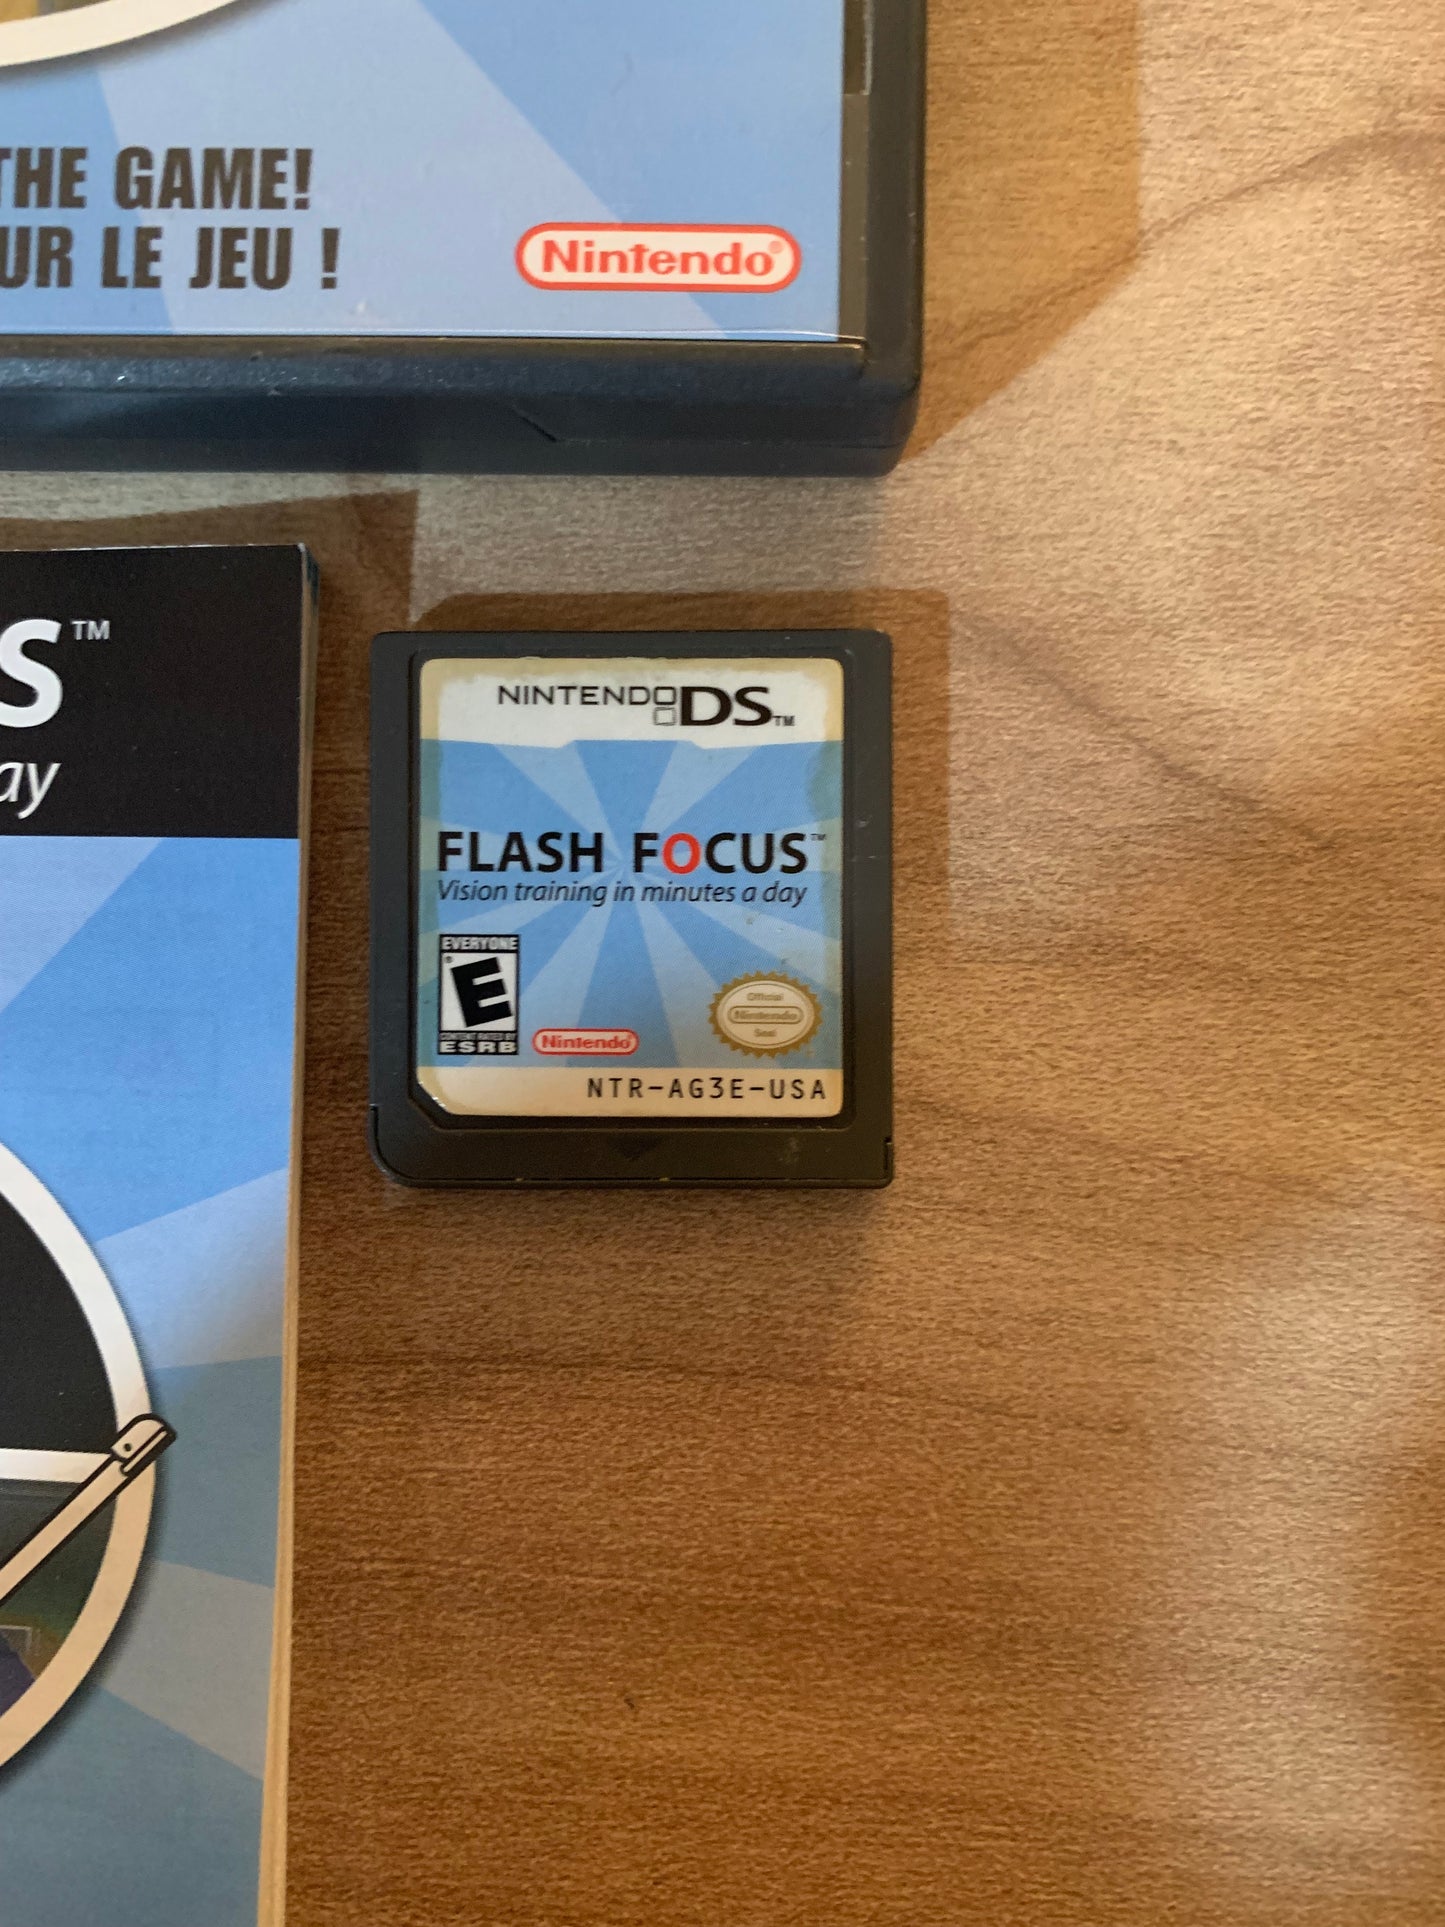 NiNTENDO DS | FLASH FOCUS ViSiON TRAiNING iN MiNUTES A DAY